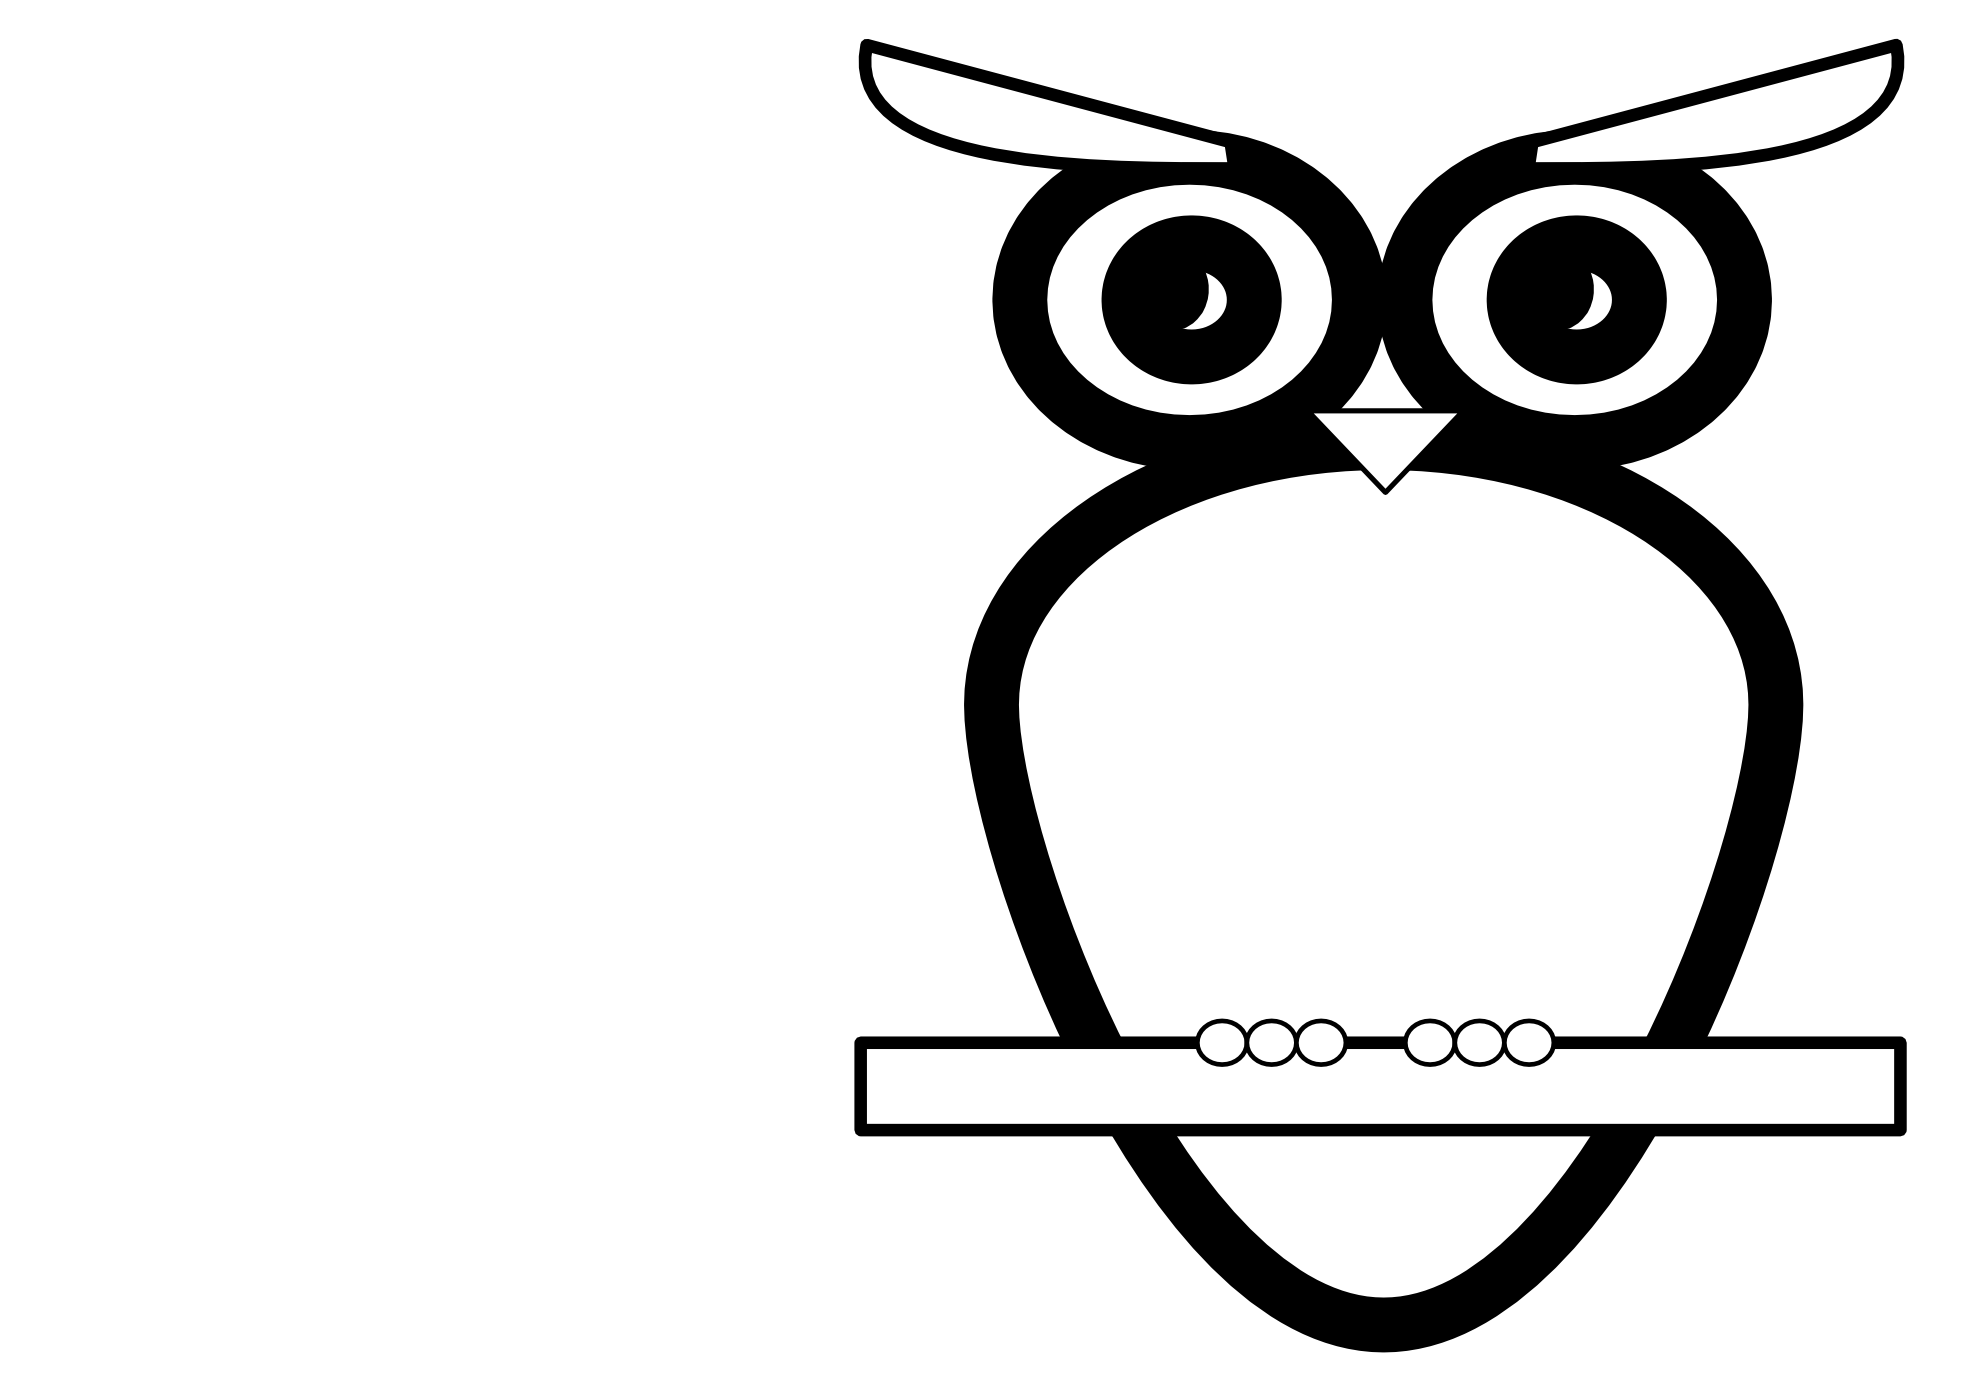 Bw Owl Black White Line Art Scalable Vector Graphics SVG Inkscape 